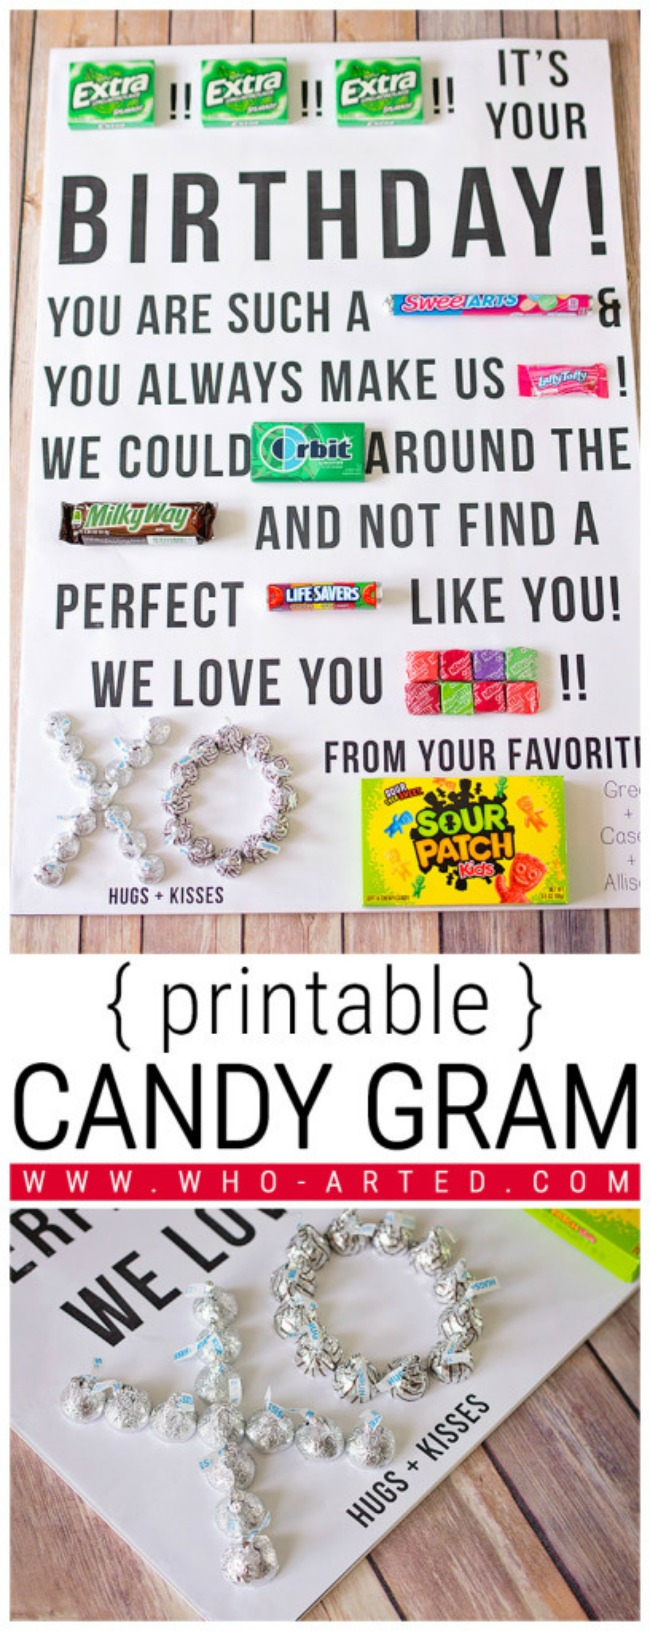 Birthday Candy Card Ideas The 11 Best Candy Gram Ideas The Eleven Best